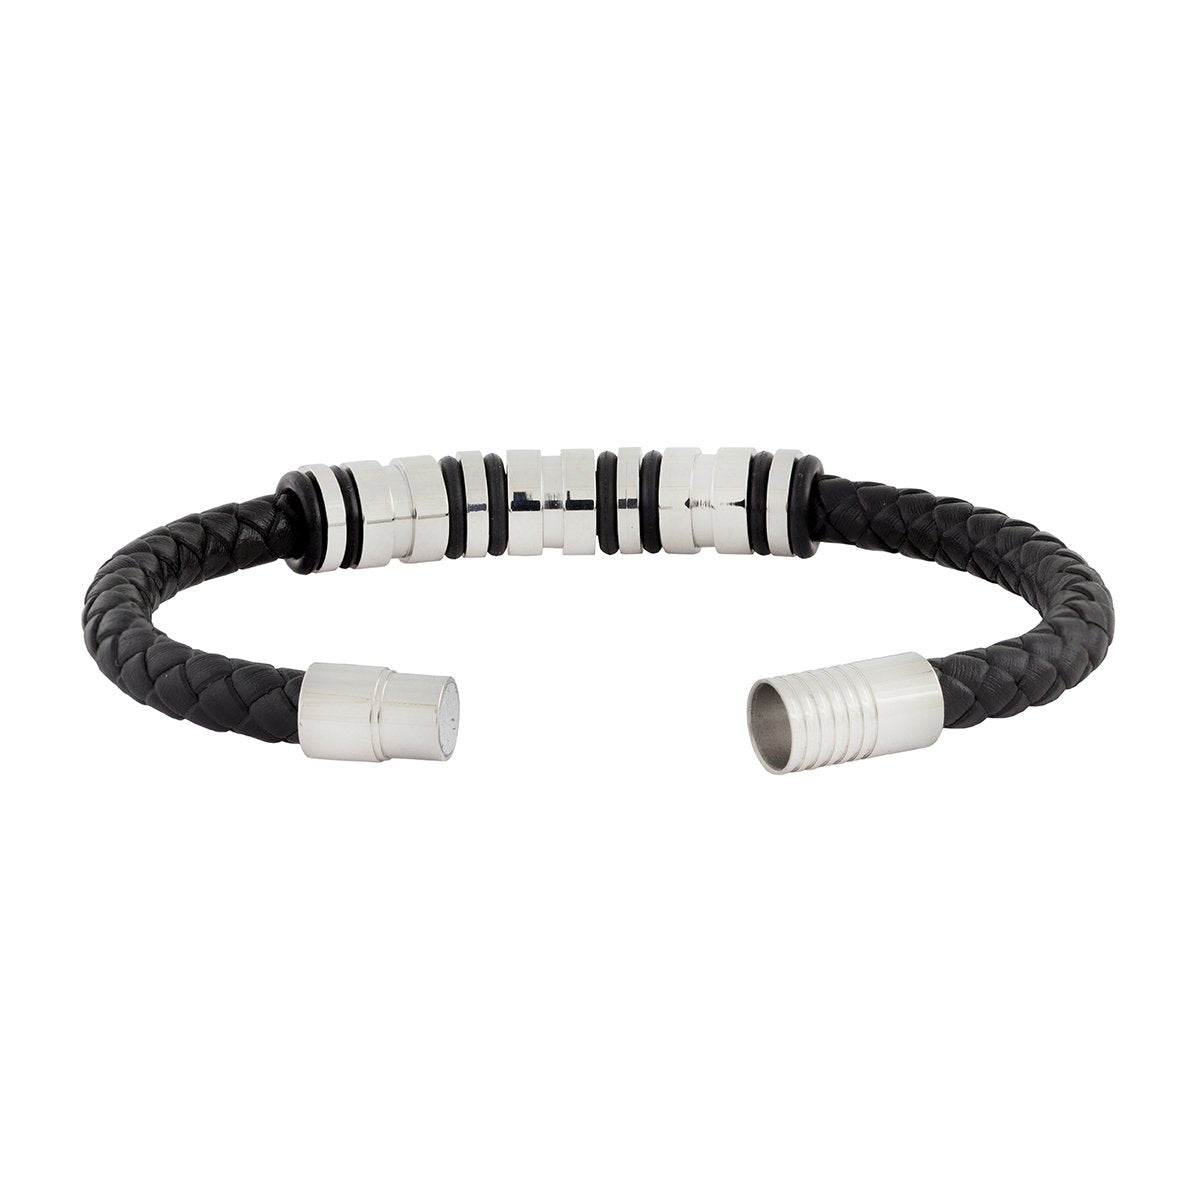 High Quality Braided Leather 316L Stainless Steel Wrist Band Bracelet